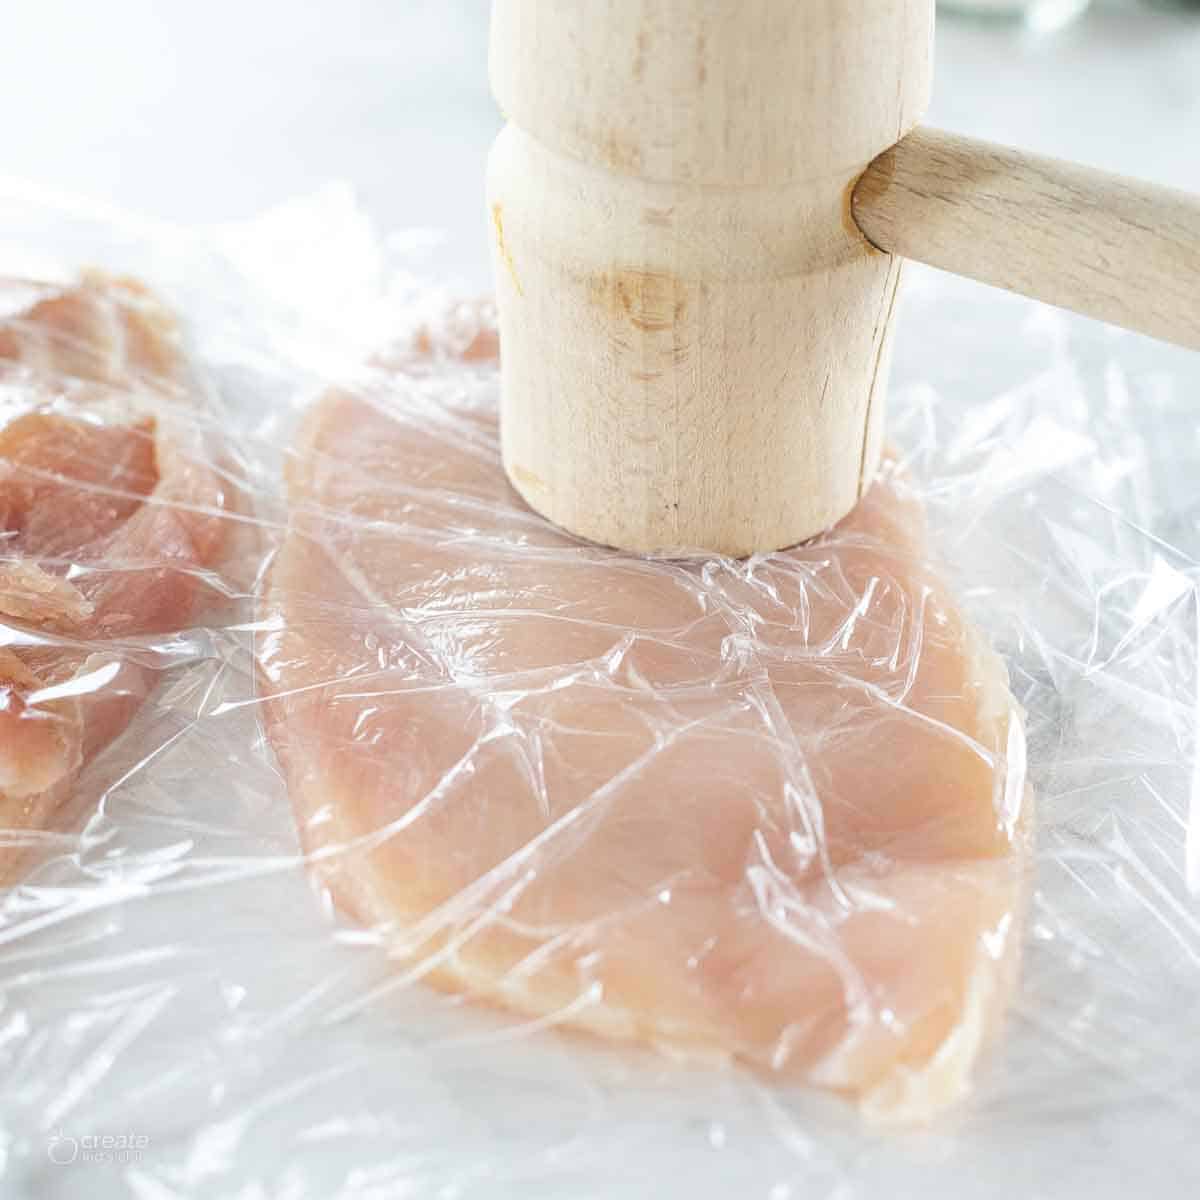 A thin chicken breast covered in plastic wrap with a mallet.